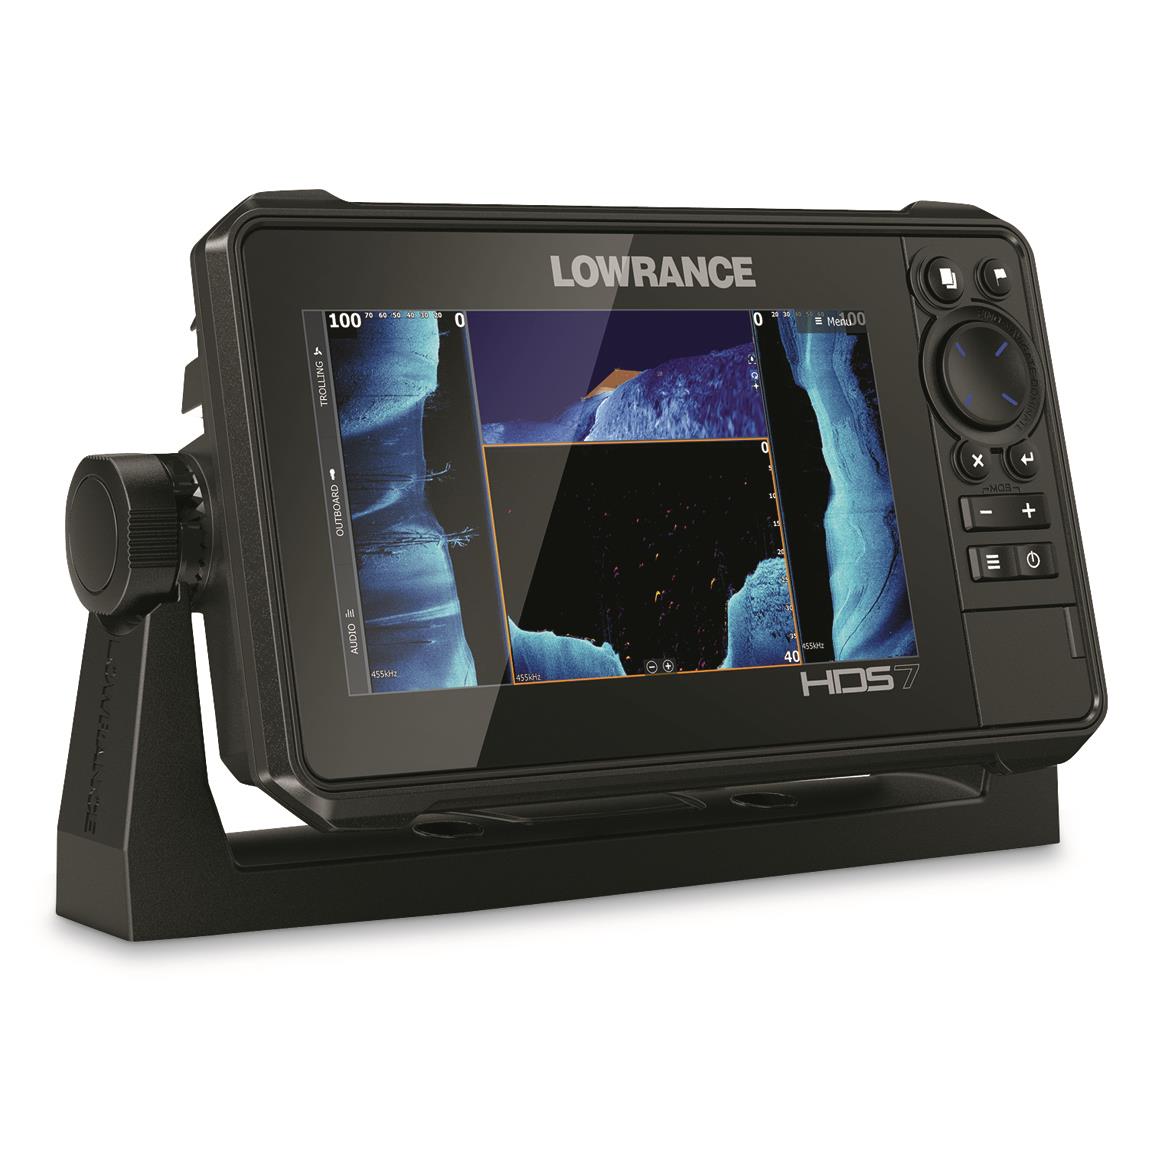 Lowrance HDS LIVE 7 Sonar Fish Finder without Transducer